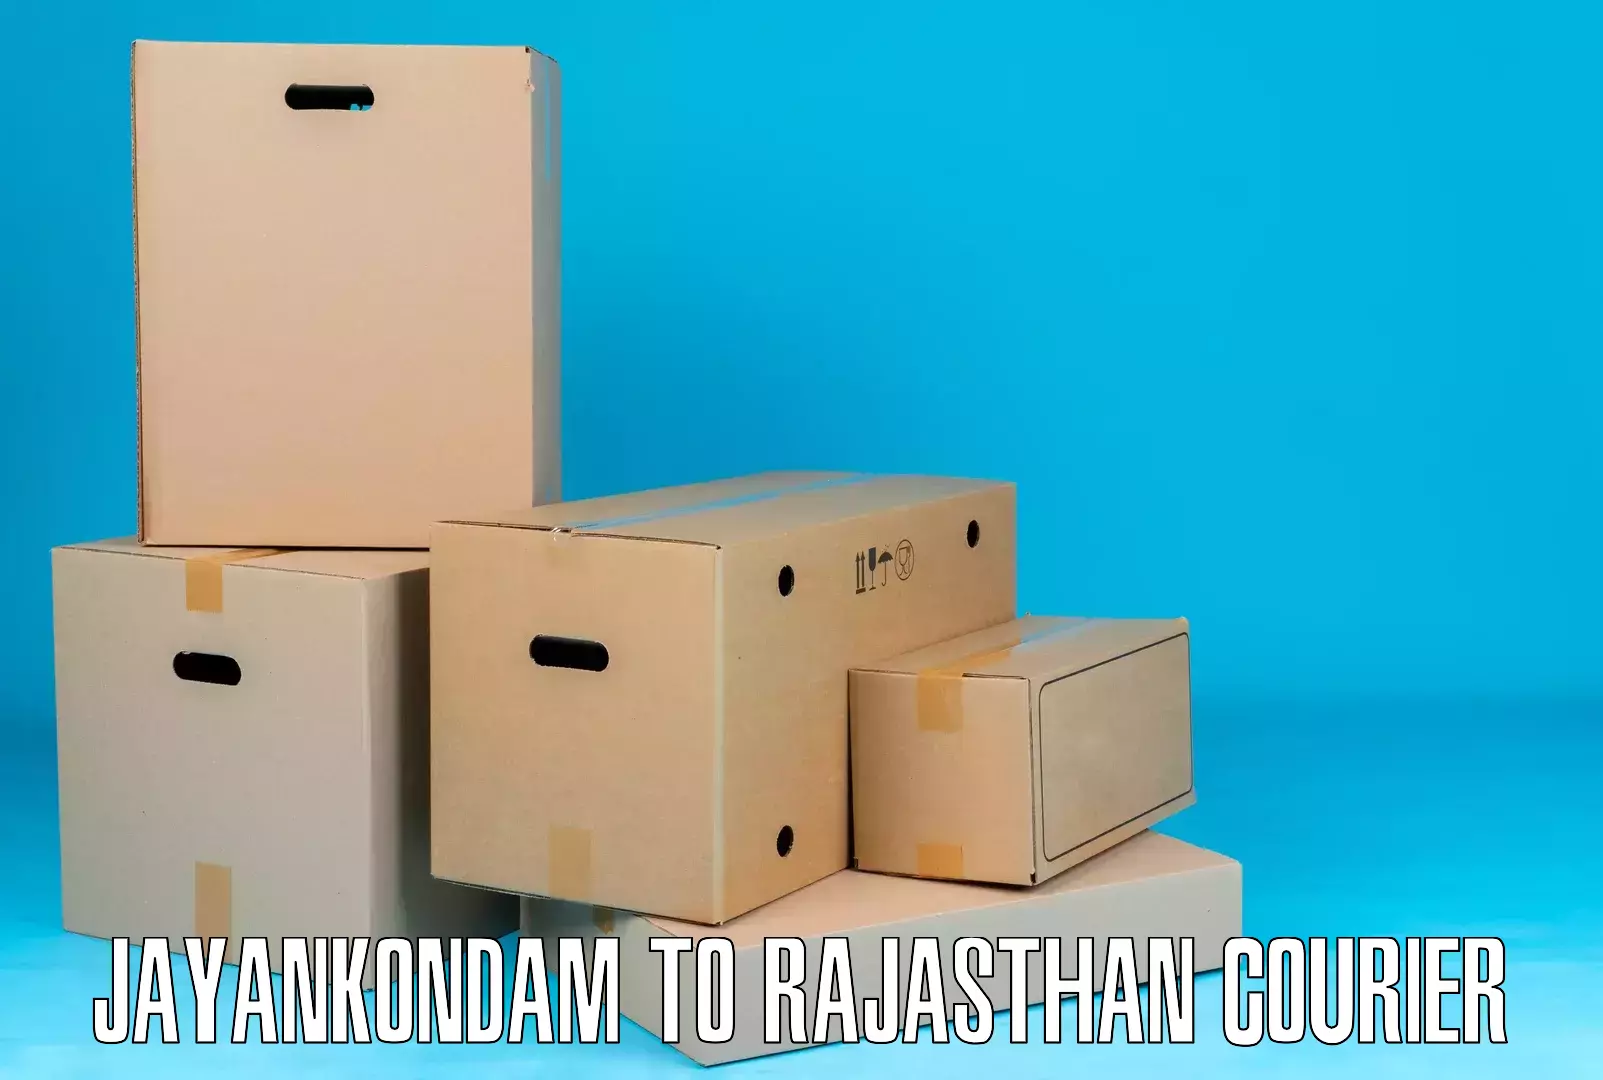 Cost-effective courier solutions Jayankondam to Jaisalmer